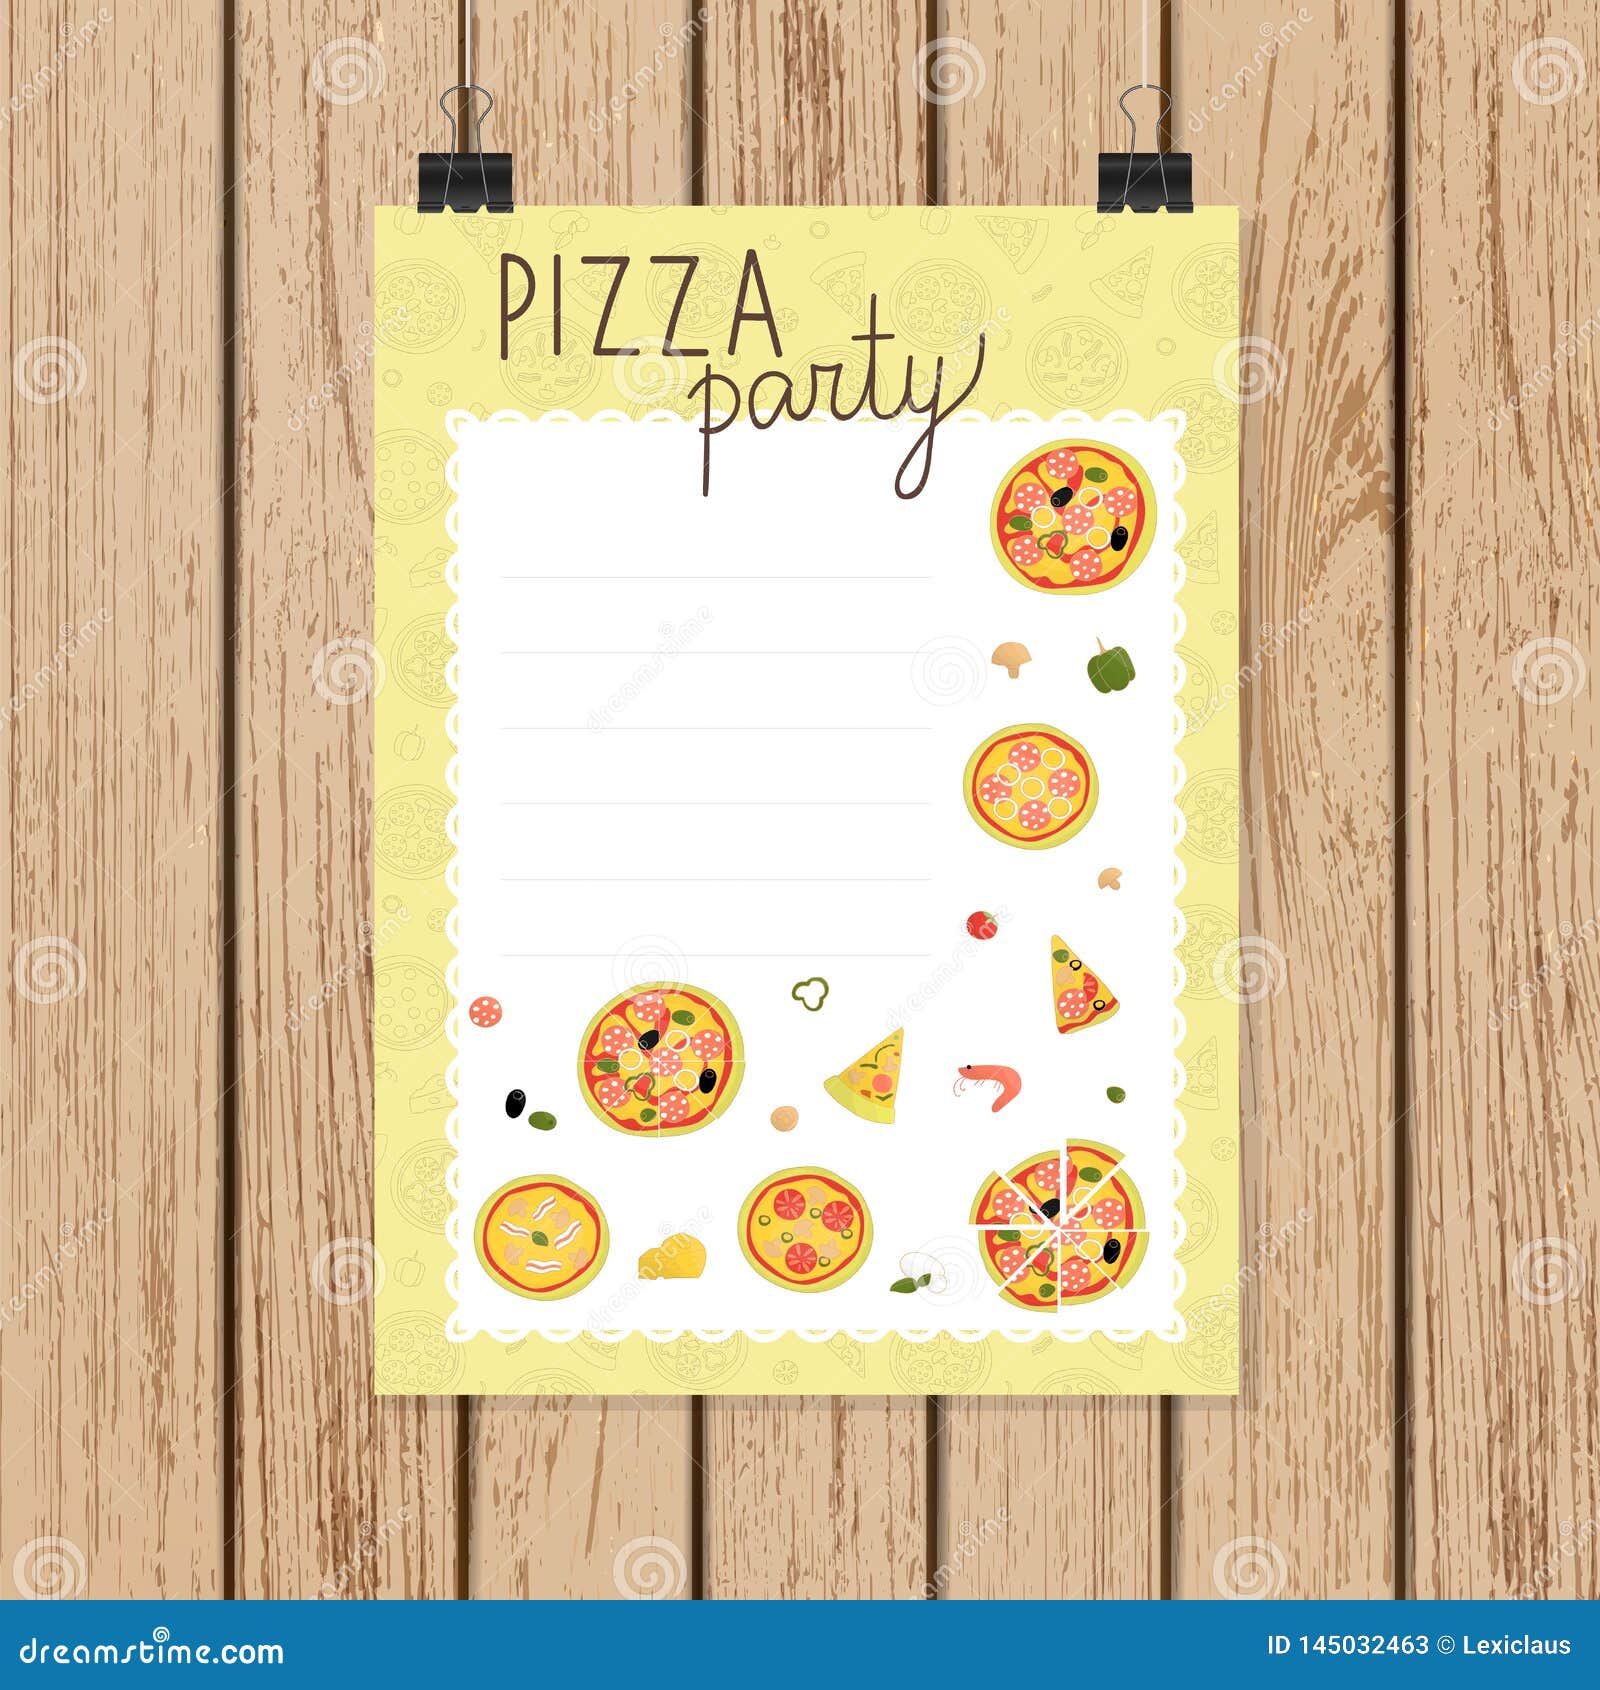 Pizza Party Invitation or Banner in Doodle Style Stock Vector Inside Pizza Party Flyer Template Free